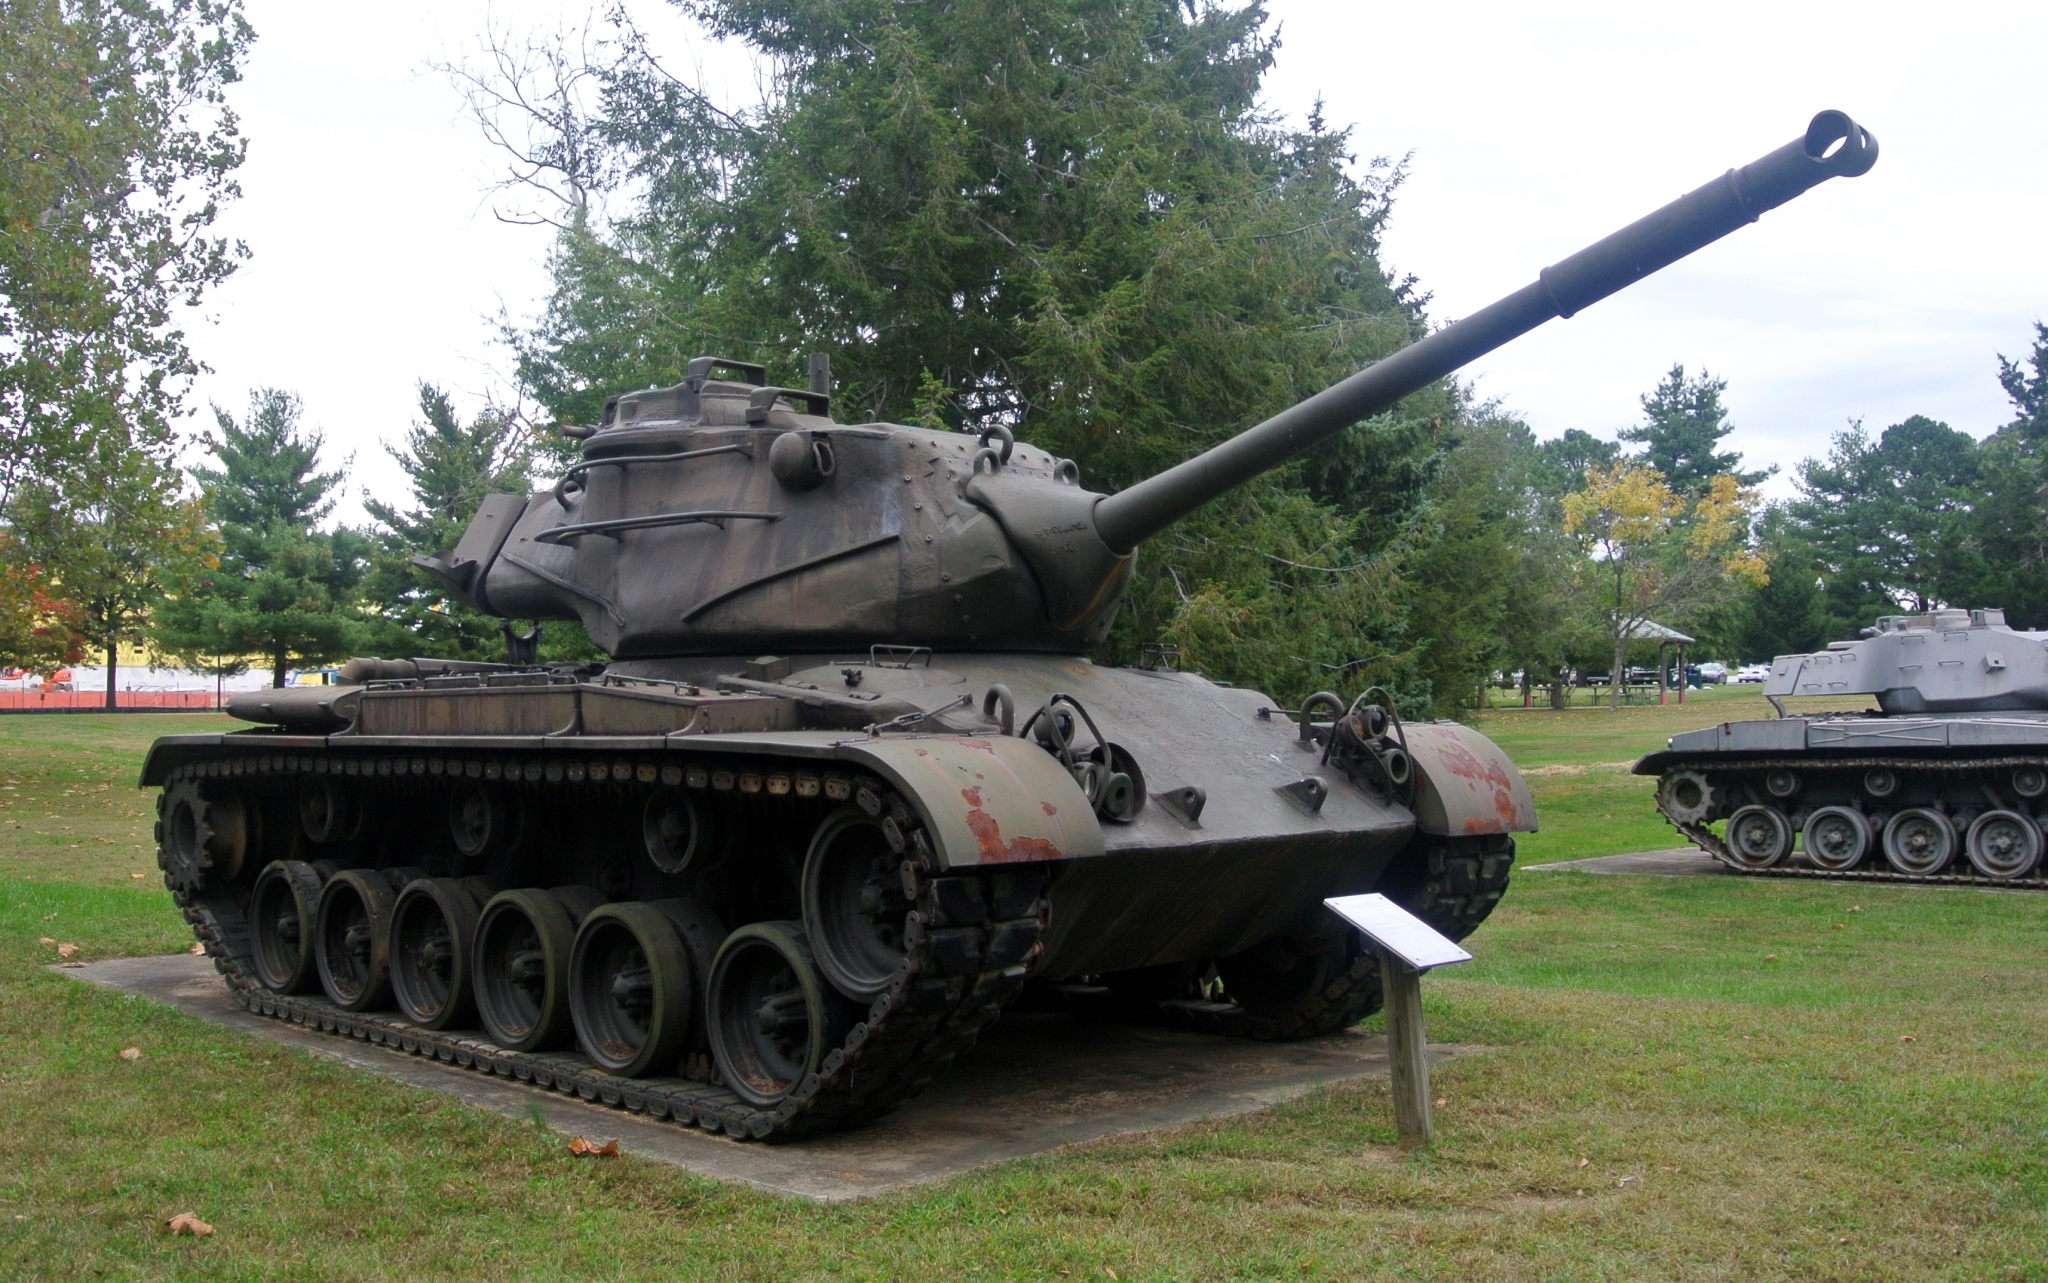 M47 Patton Years active: 1952 - early 1960s